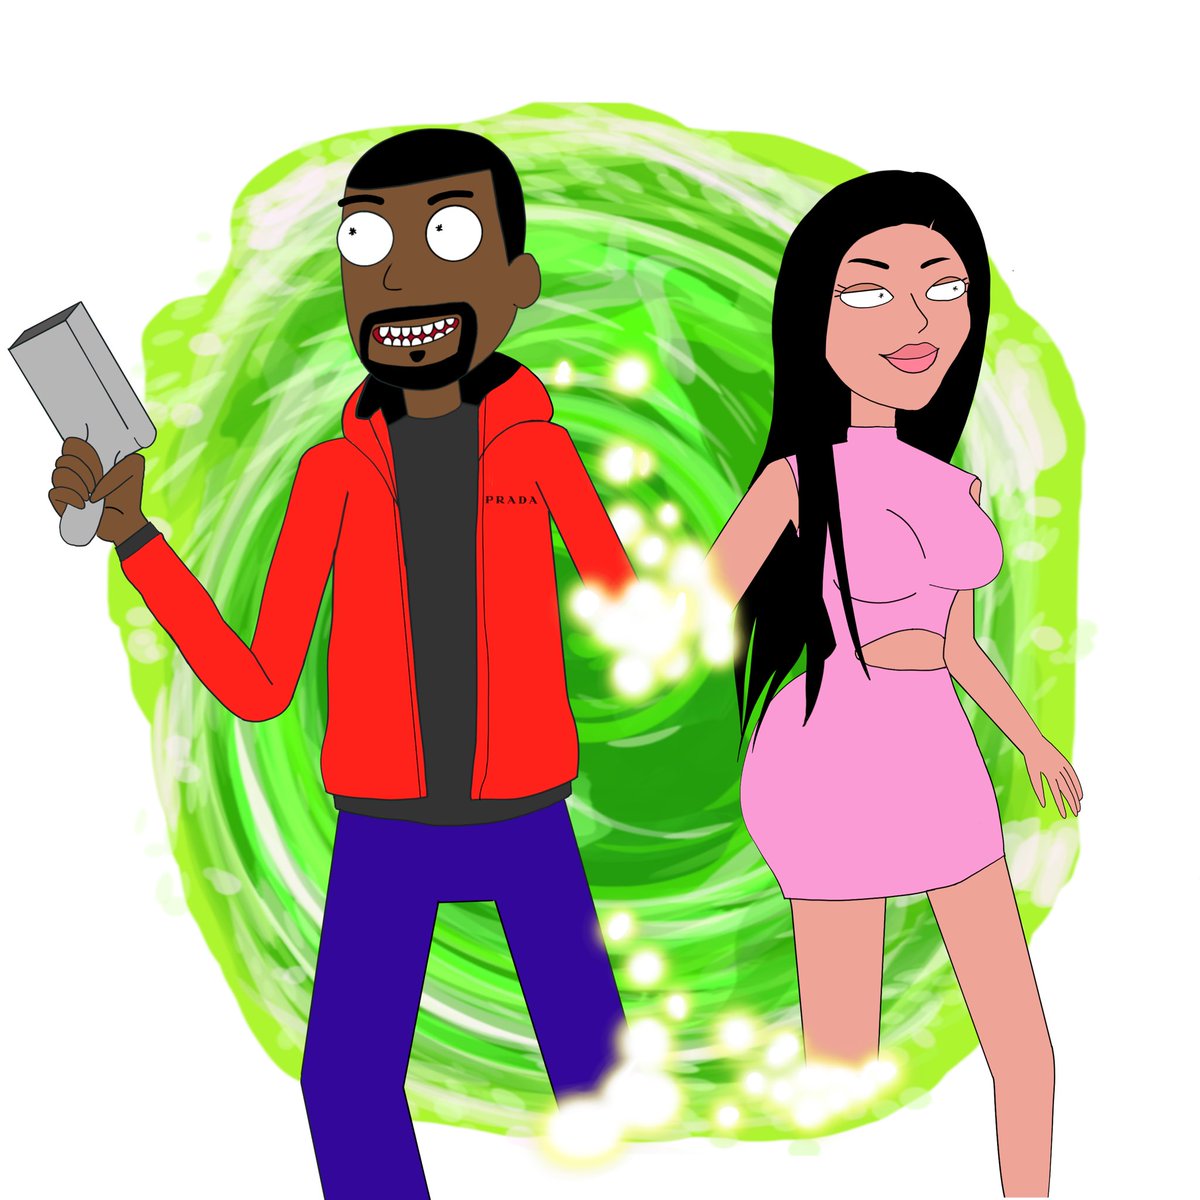 Kanye Tweeted Out Strange 'Rick and Morty' Fan Art for Some Reason